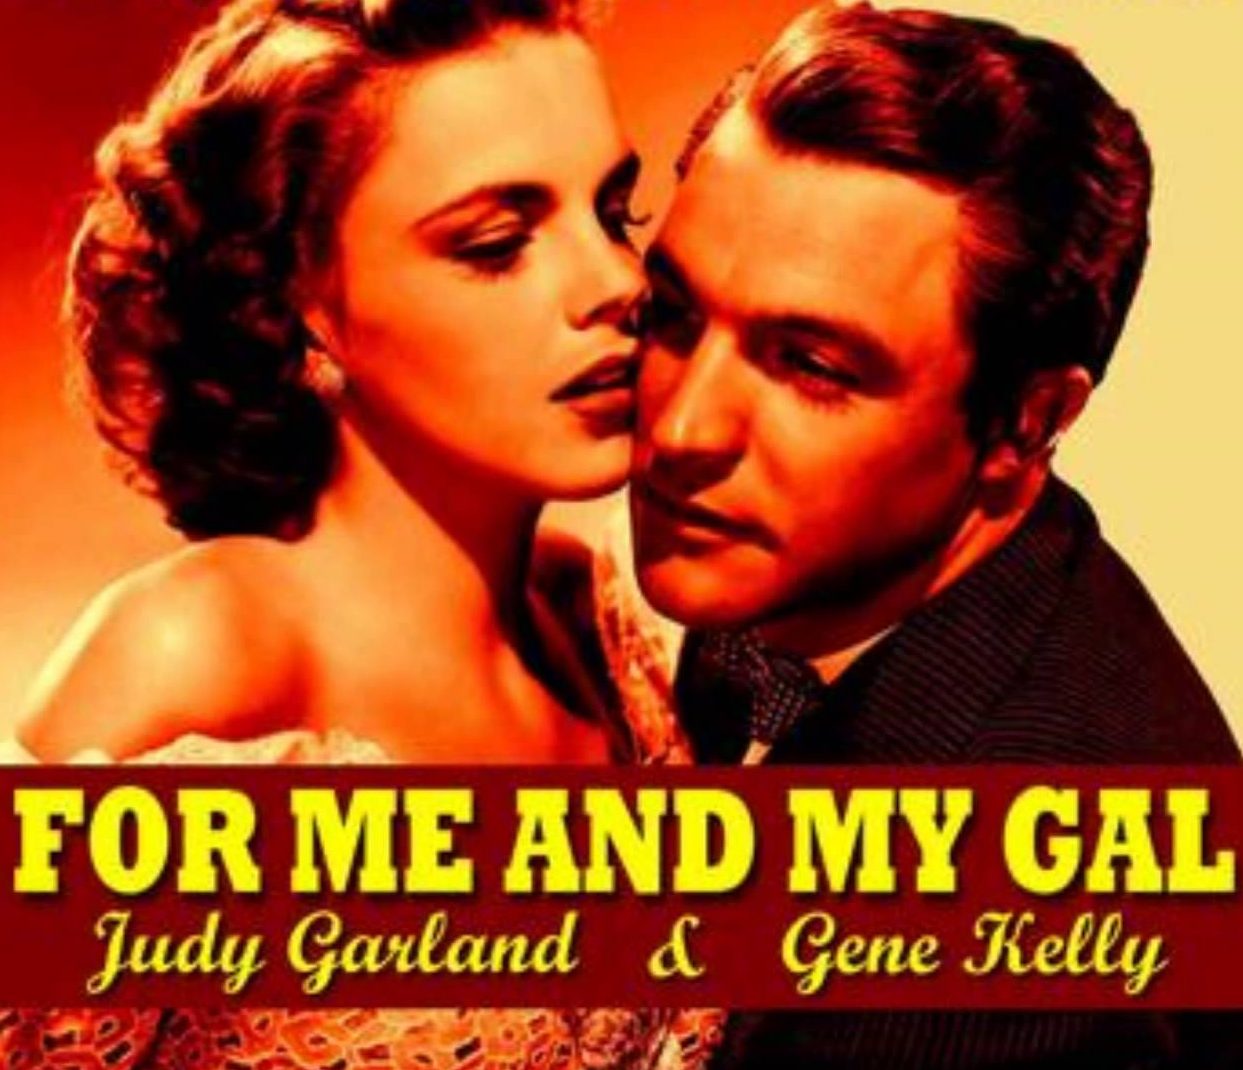 For Me and My Gal (1942), starring Gene Kelly, Judy Garland, George Murphy